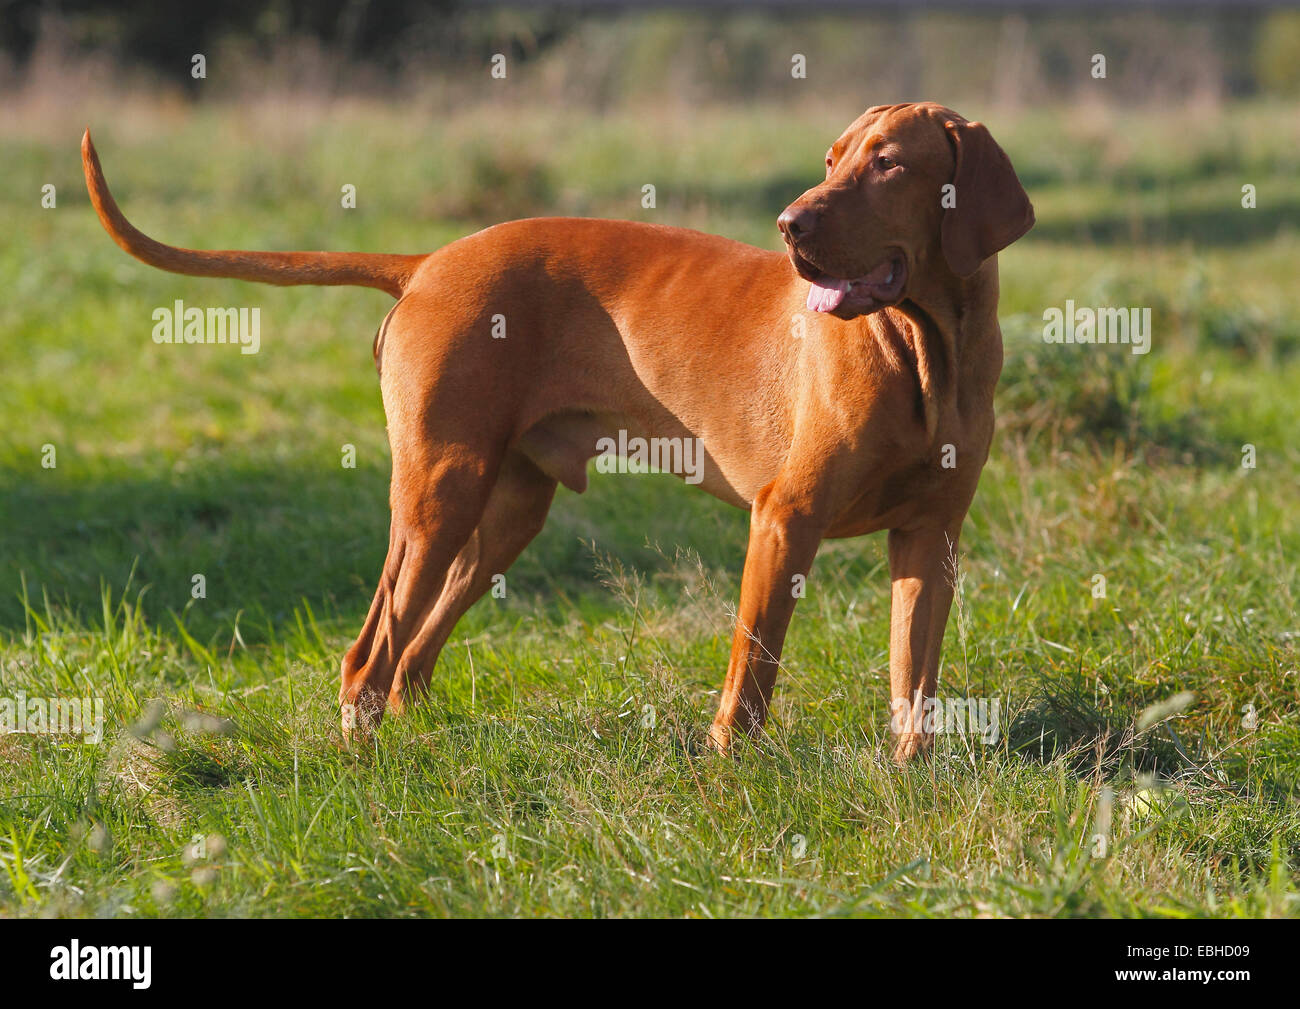 Hungarian Short-haired Pointing Dog, Magyar Vizsla (Canis lupus f. familiaris), sixteen months old male dog standing in a meadow Stock Photo